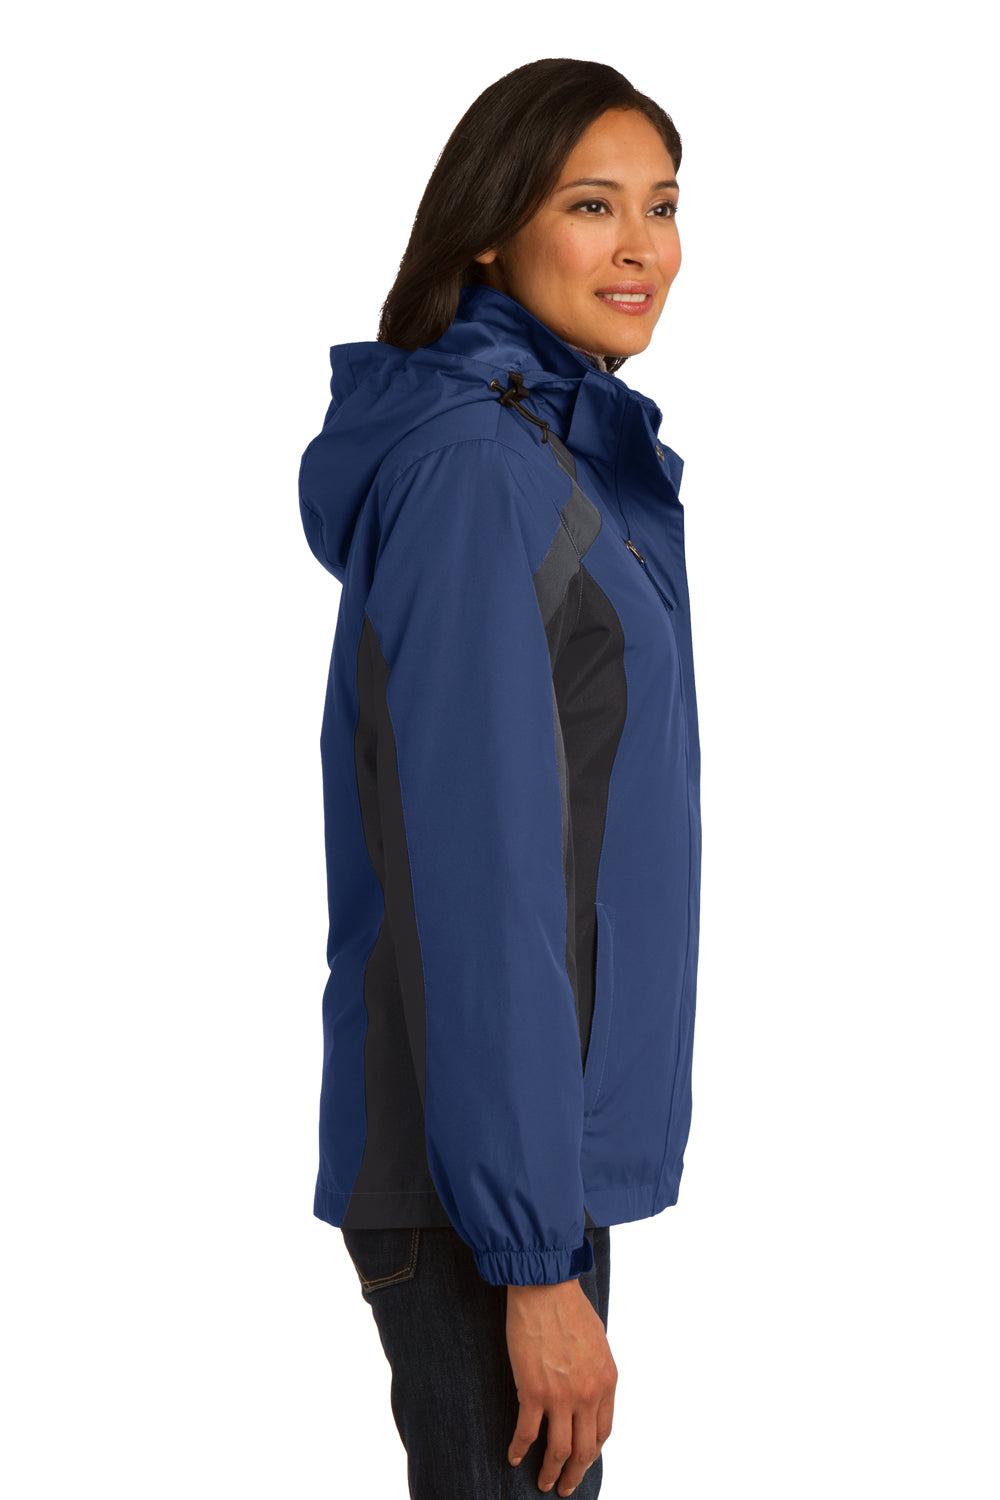 Port Authority L321 Womens 3-in-1 Wind & Water Resistant Full Zip Hooded Jacket Admiral Blue/Black/Grey Side